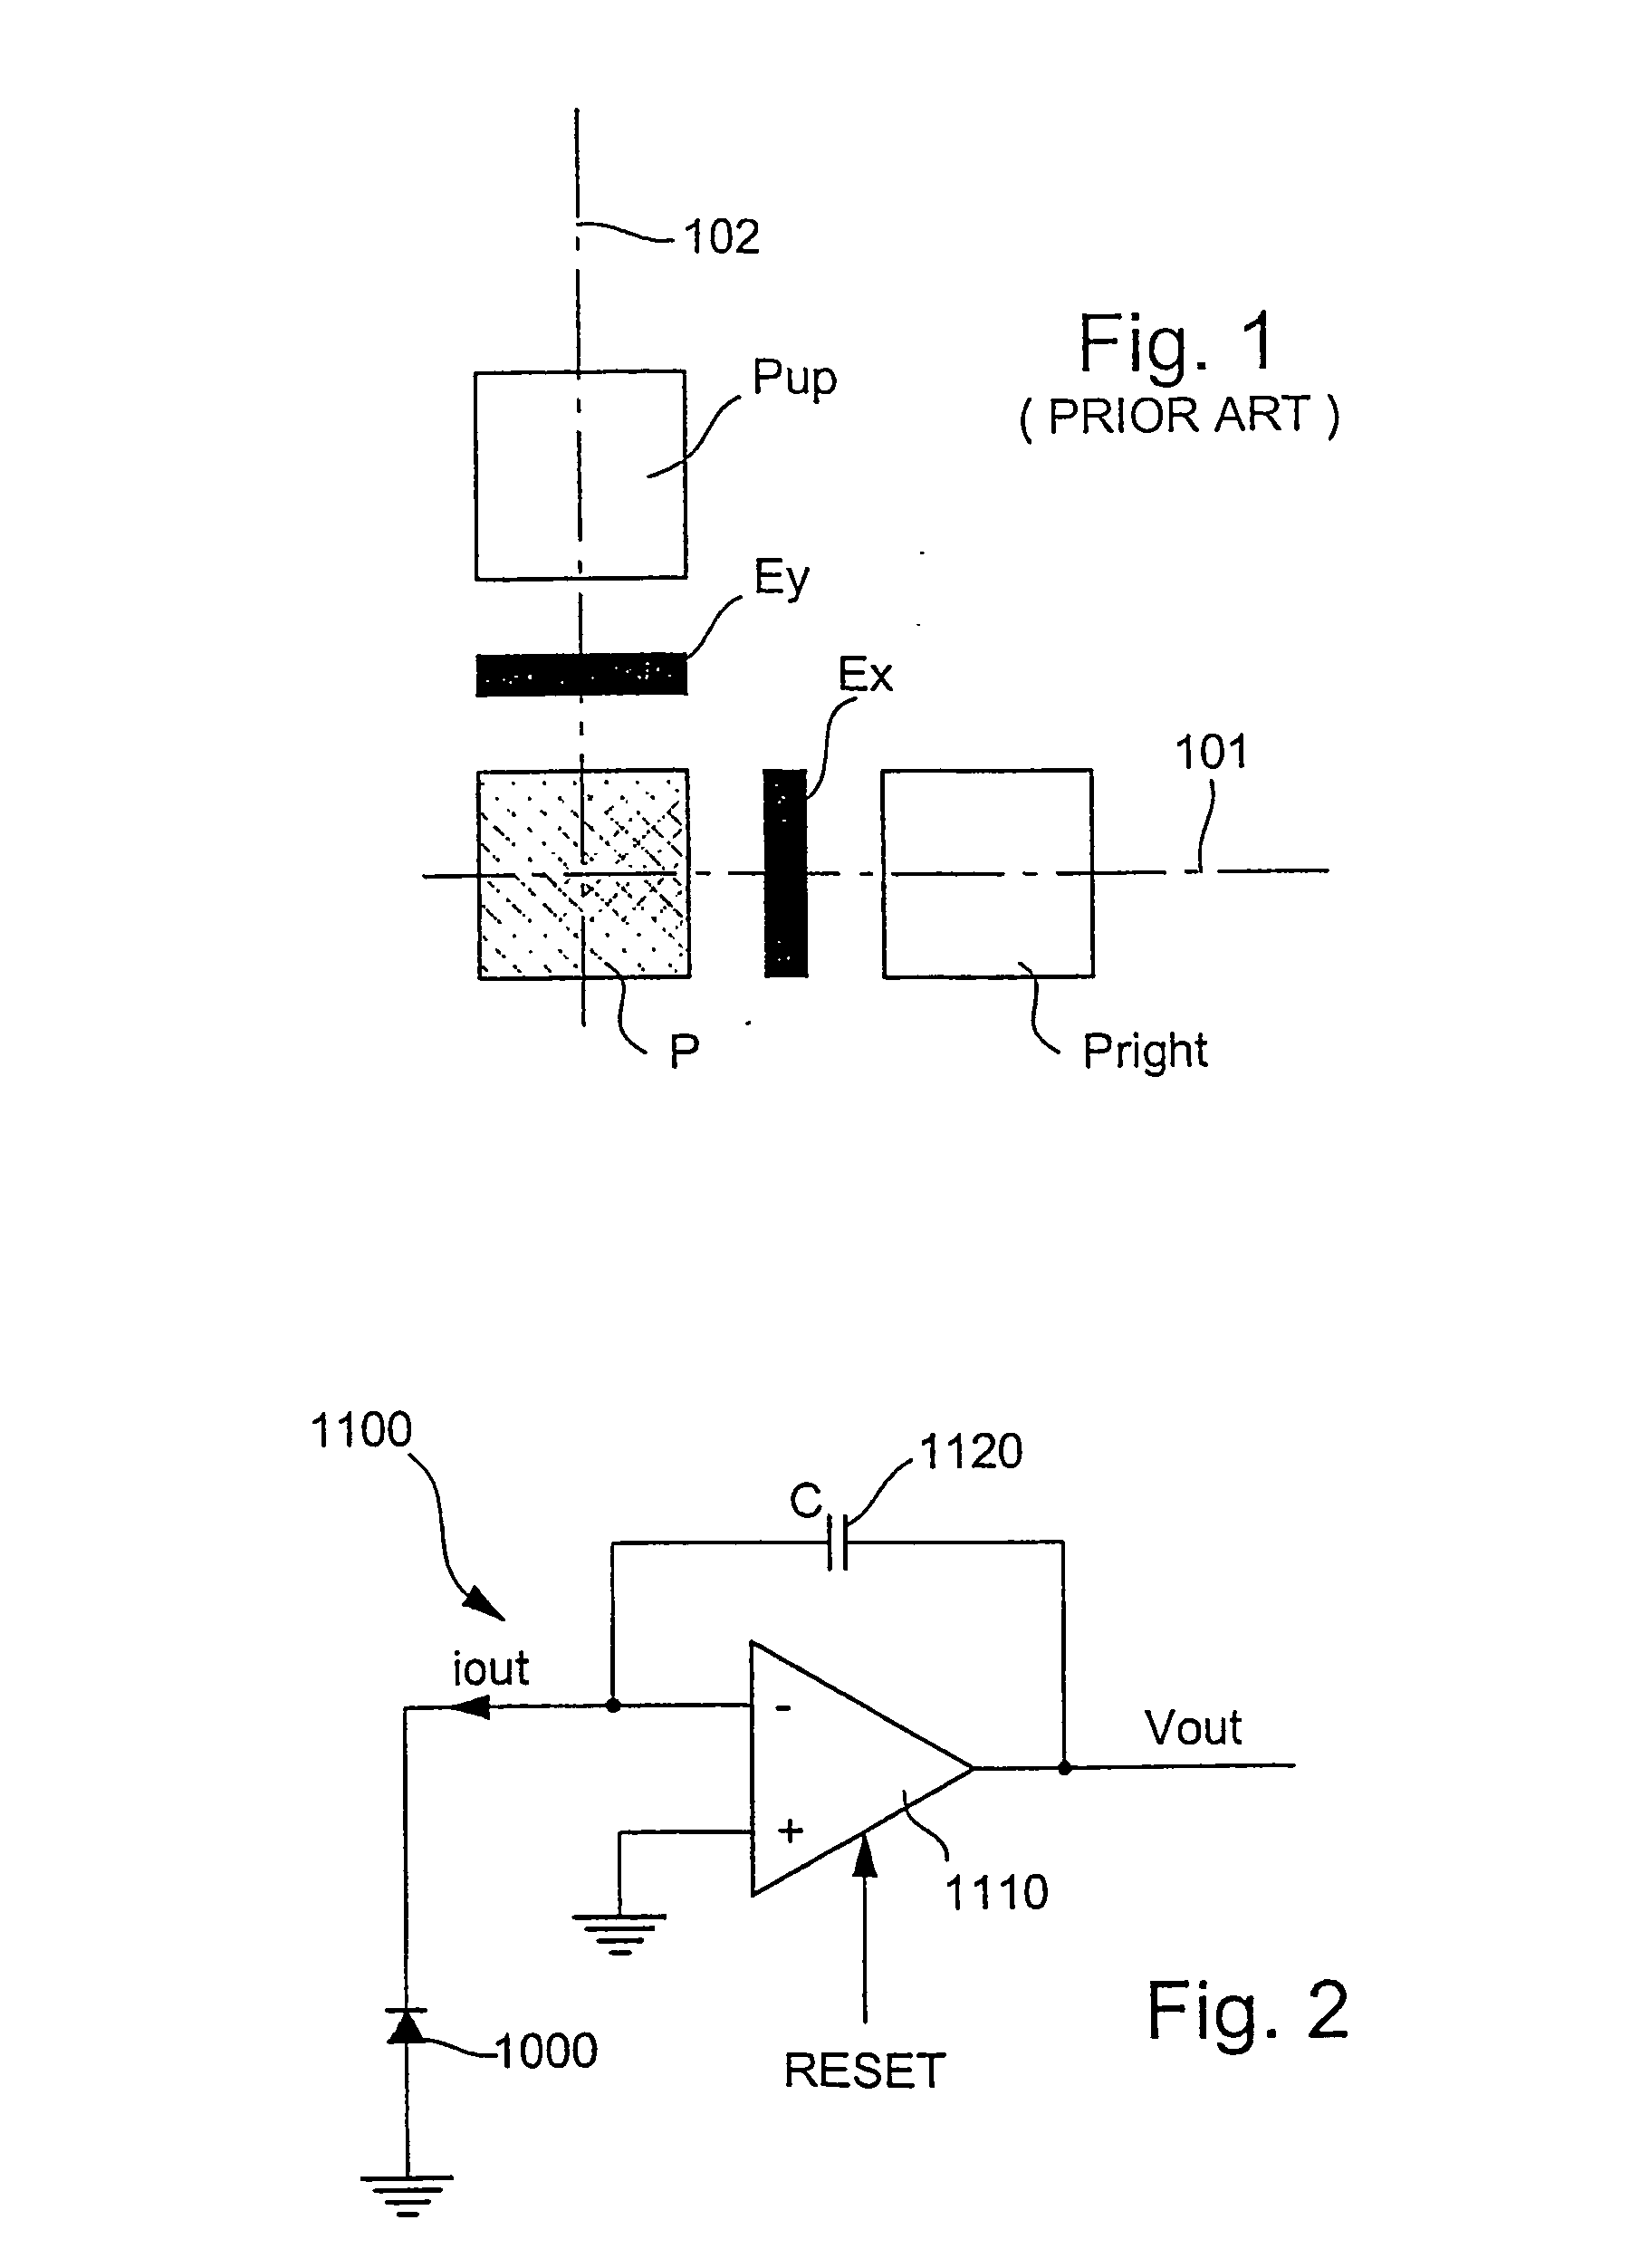 Method and sensing device for motion detection in an optical pointing device, such as an optical mouse